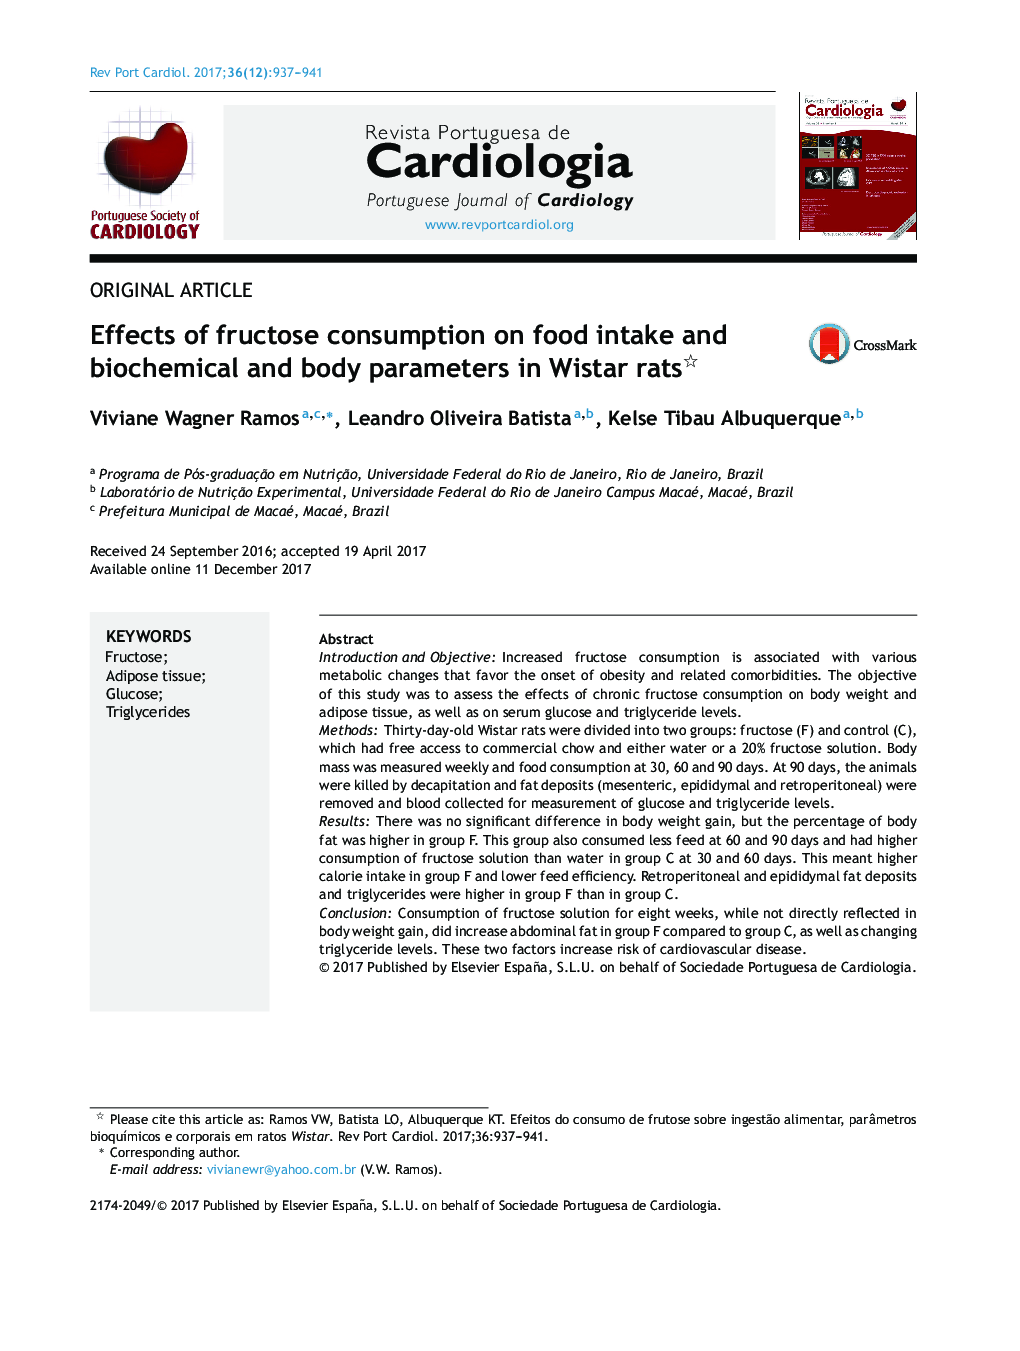 Effects of fructose consumption on food intake and biochemical and body parameters in Wistar rats